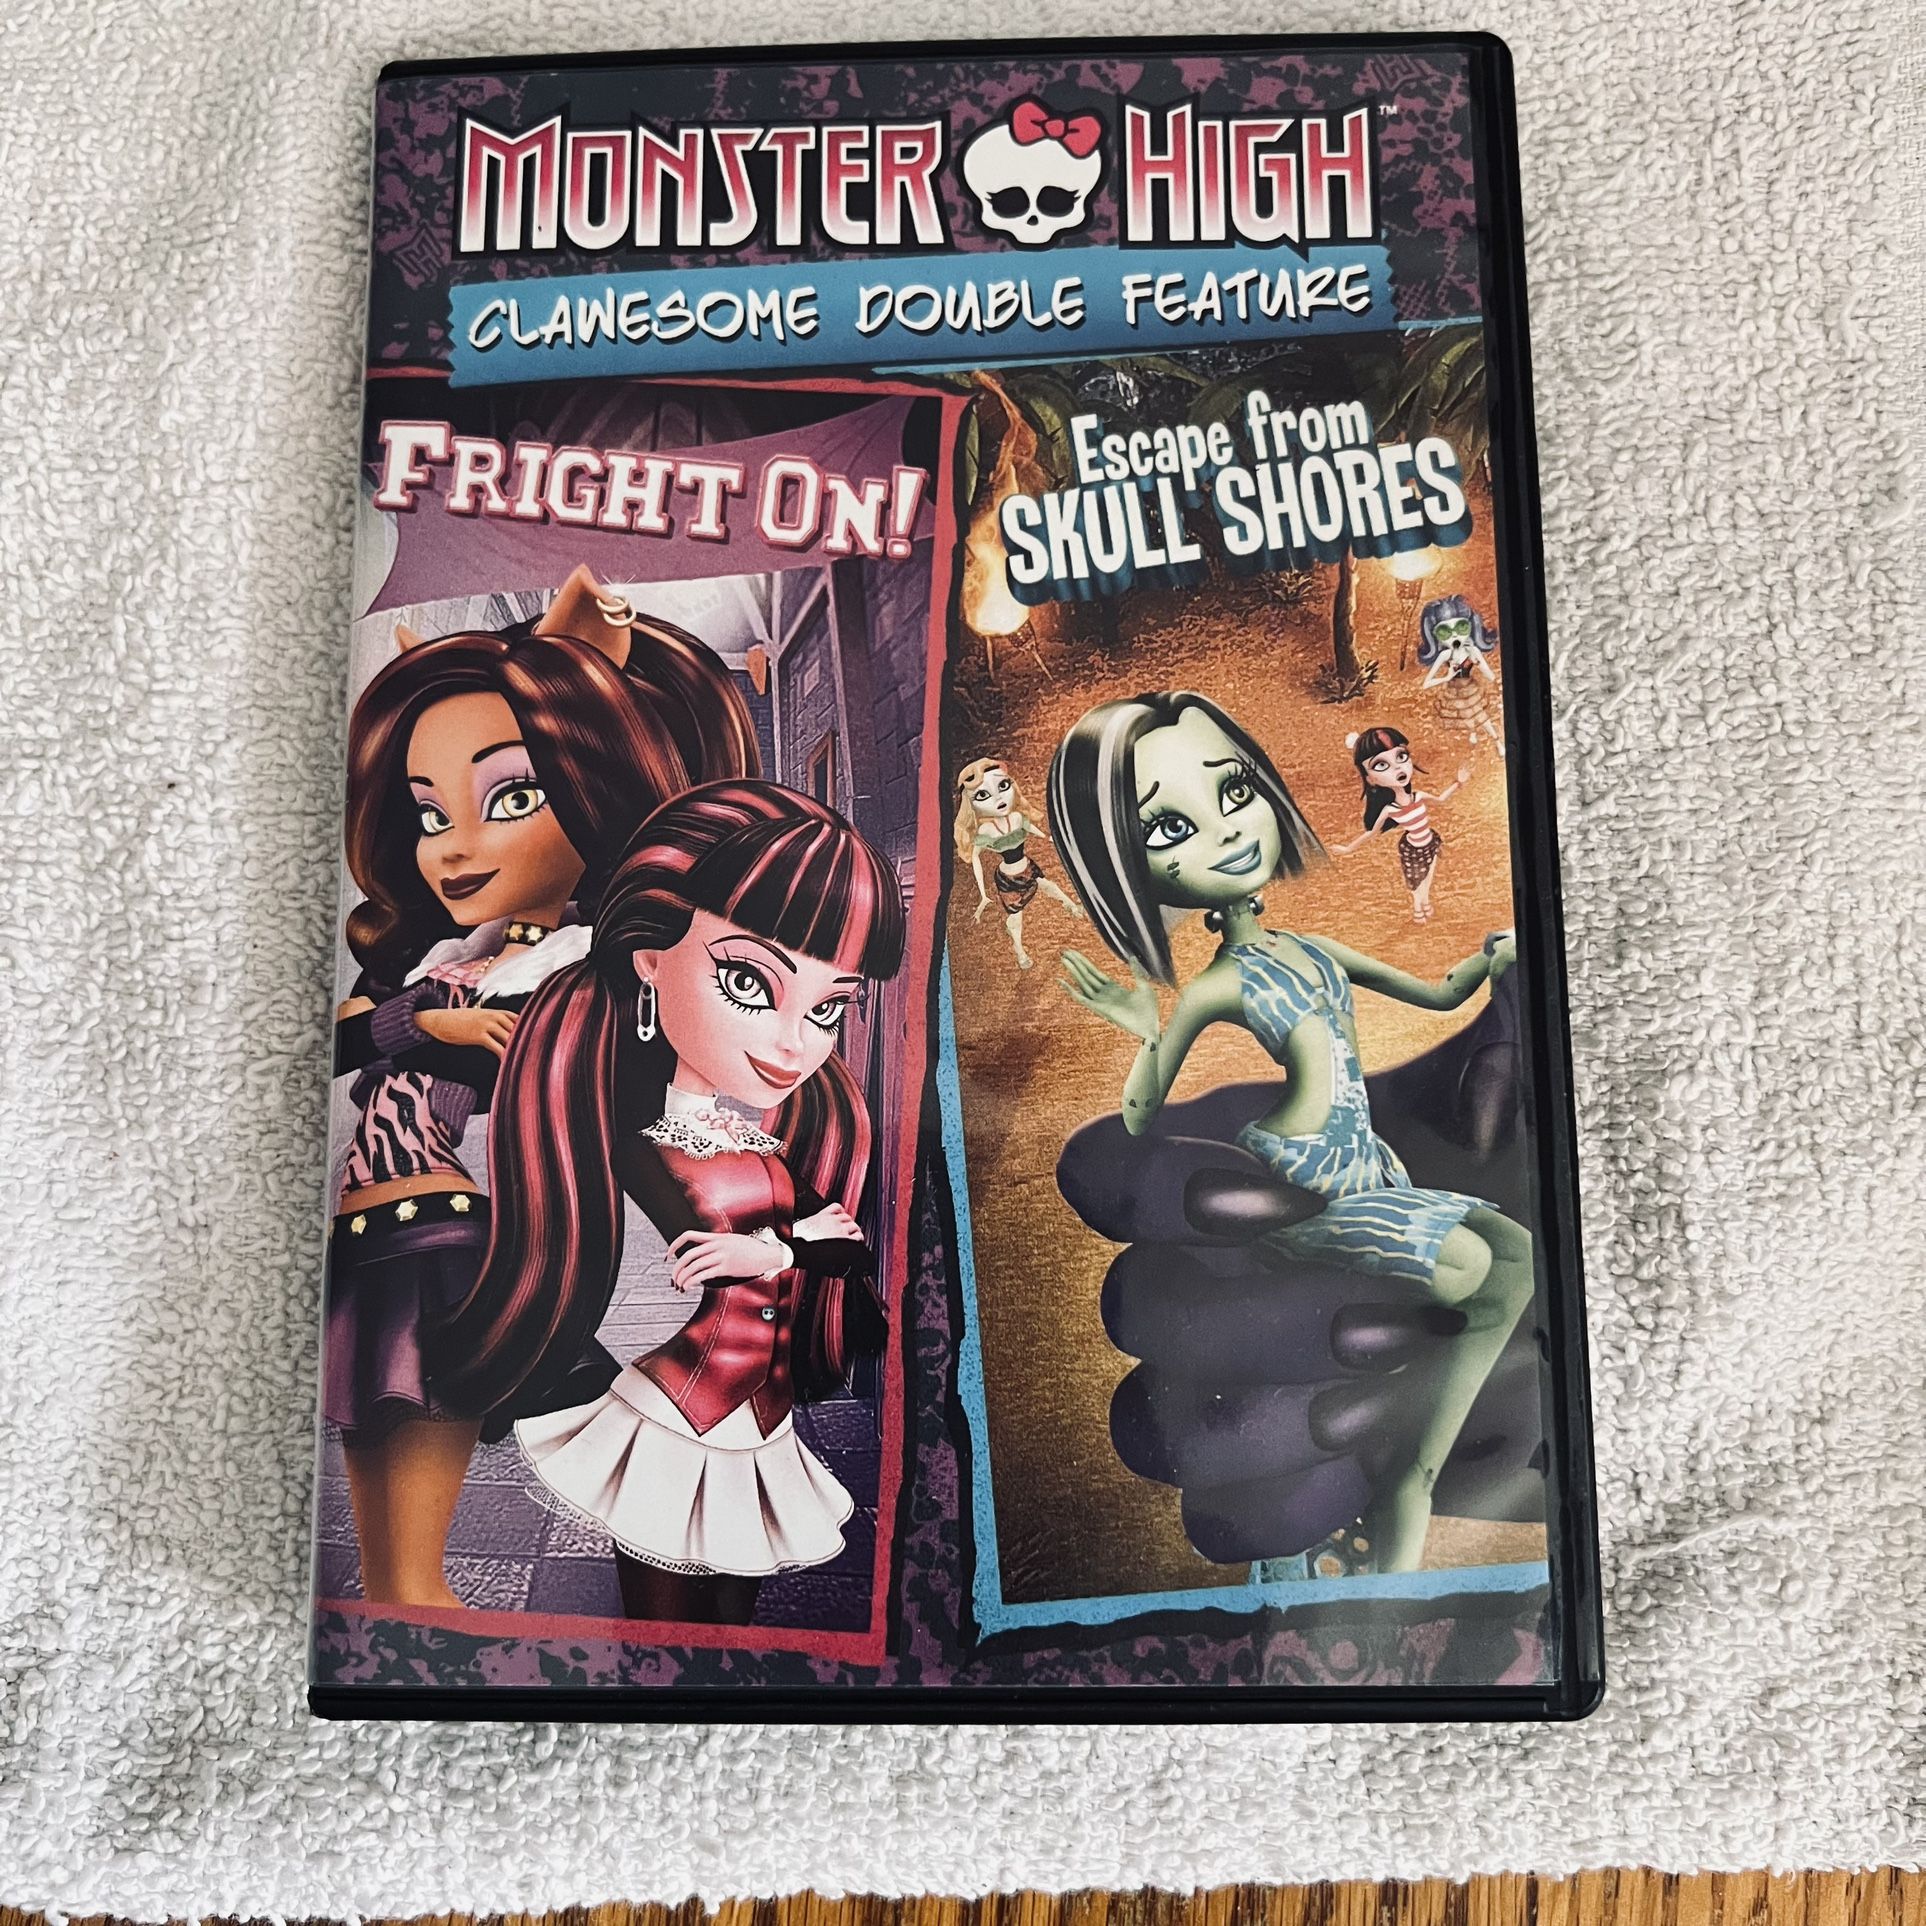 Monster High Clawsome Double Feature Fright On And Escape From Skull Shores DVD 